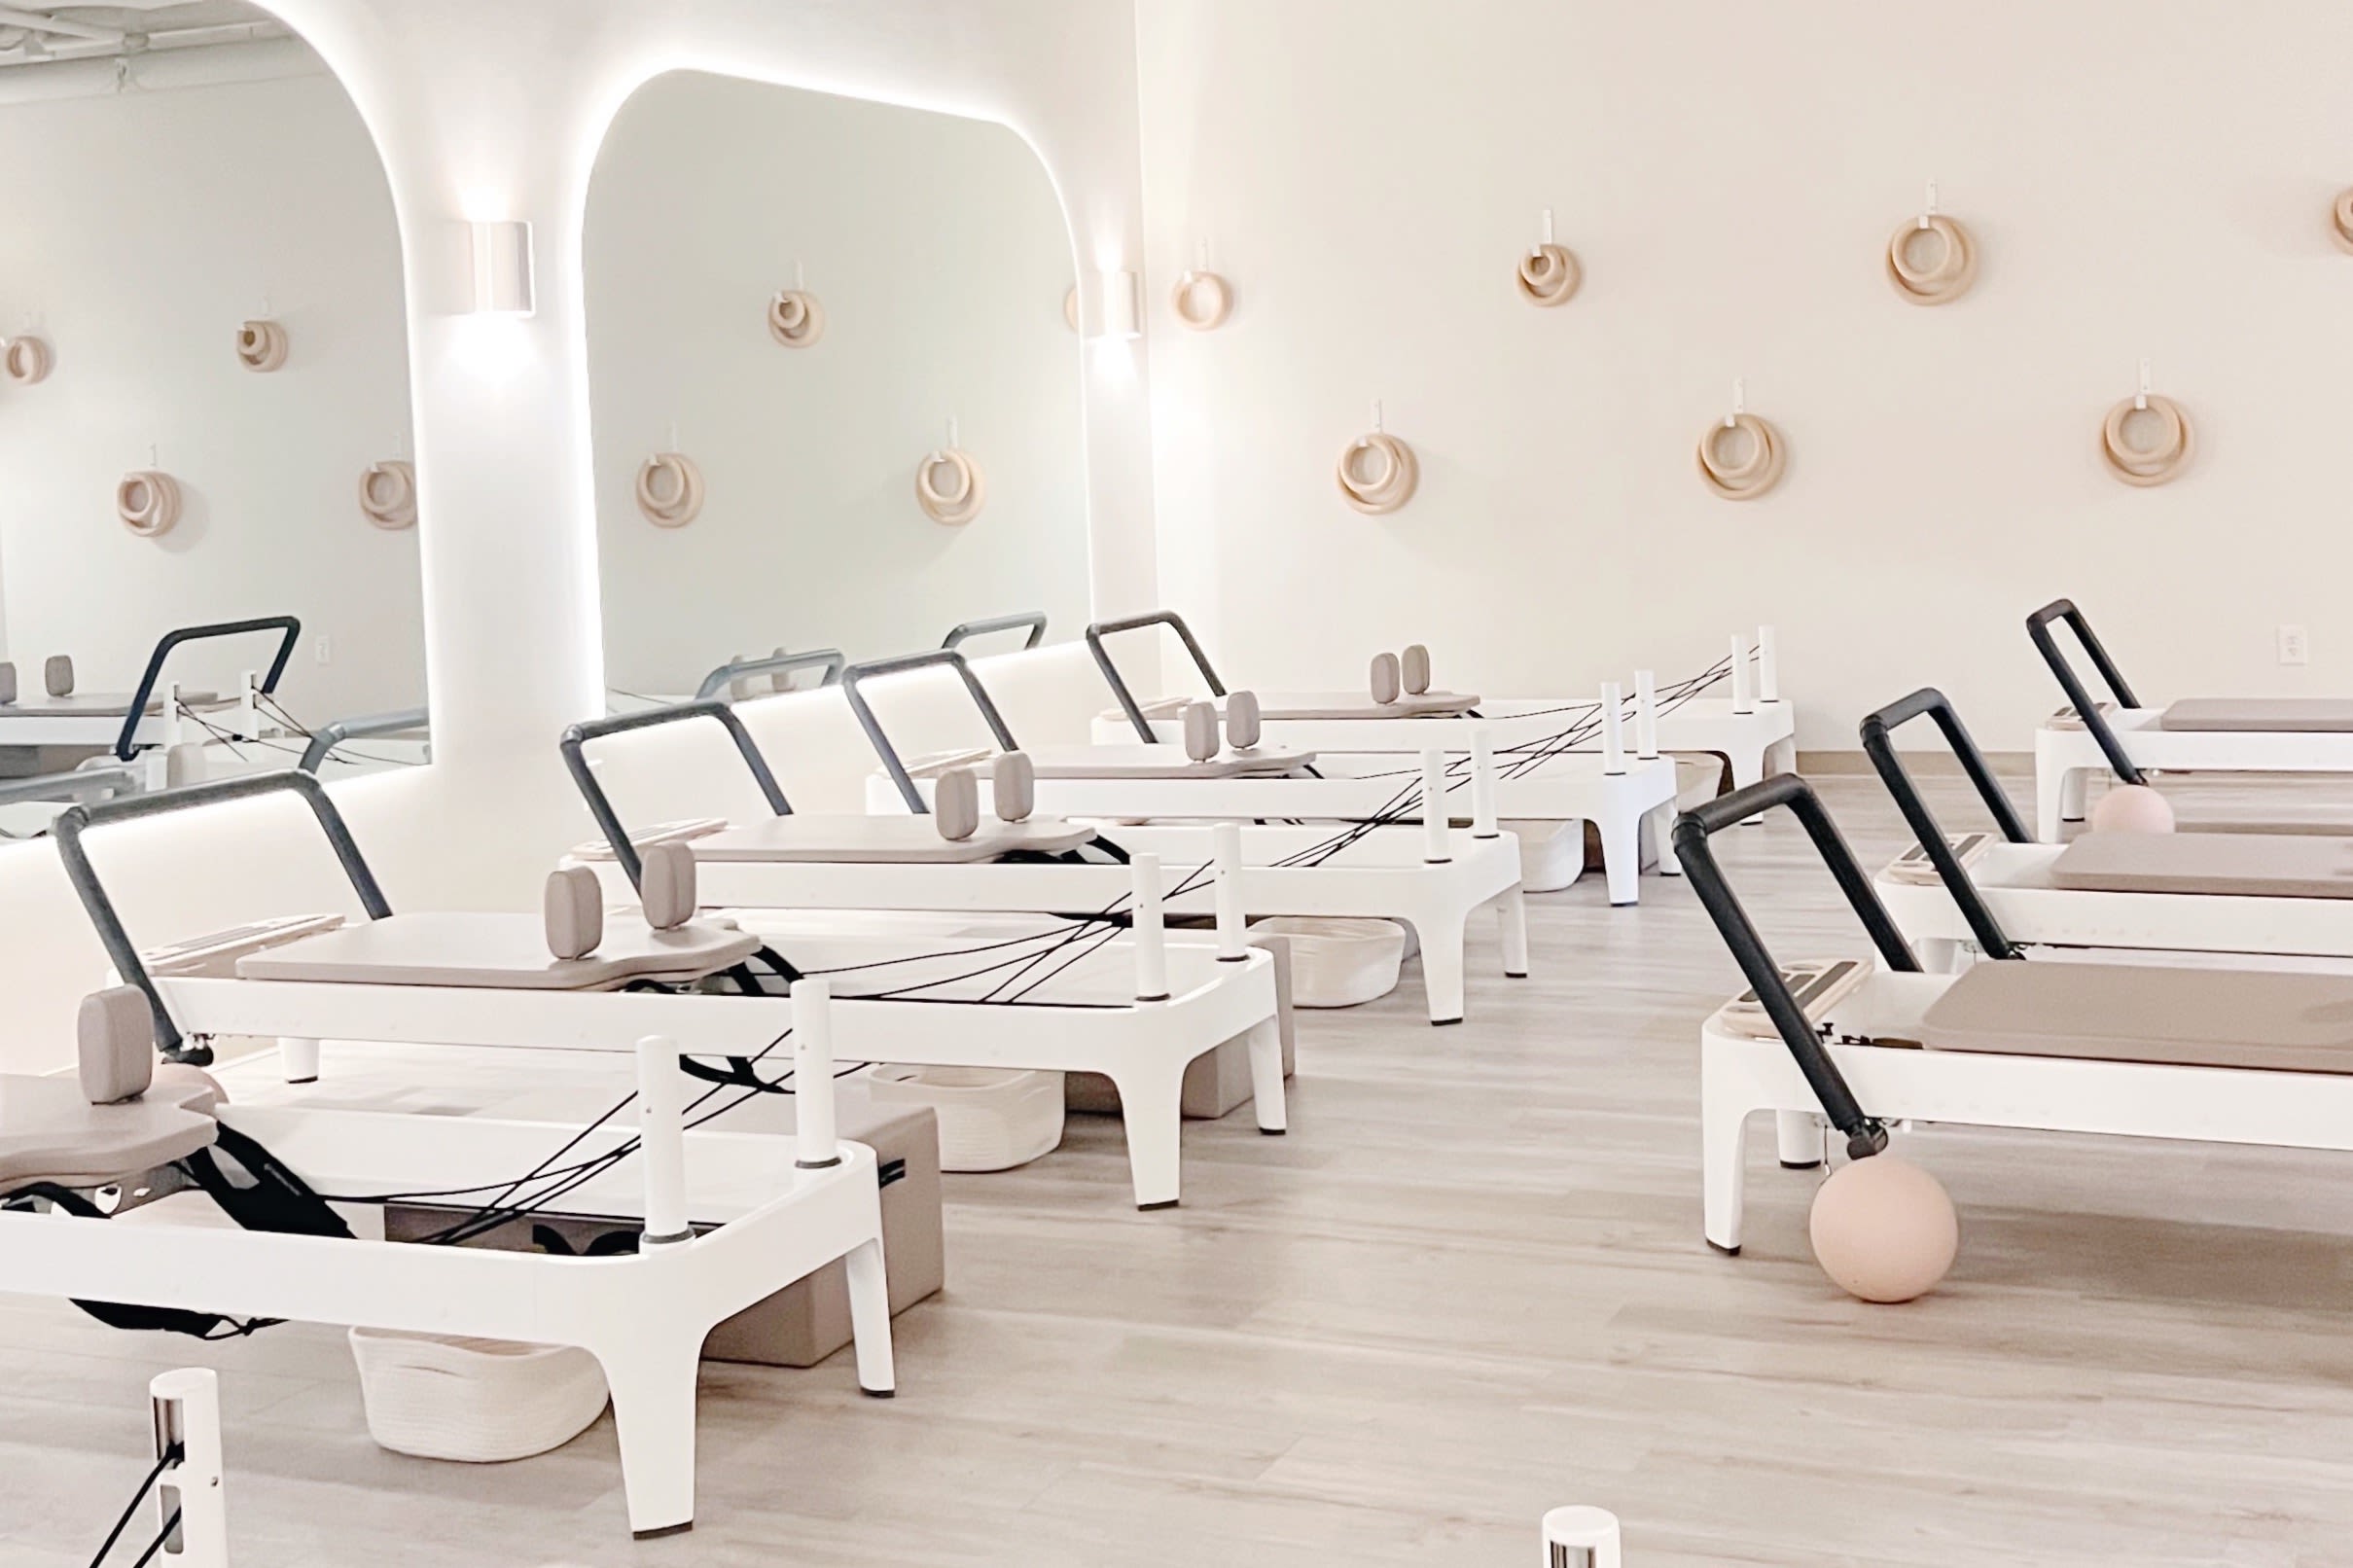 The Daily Pilates Buckhead: Read Reviews and Book Classes on ClassPass